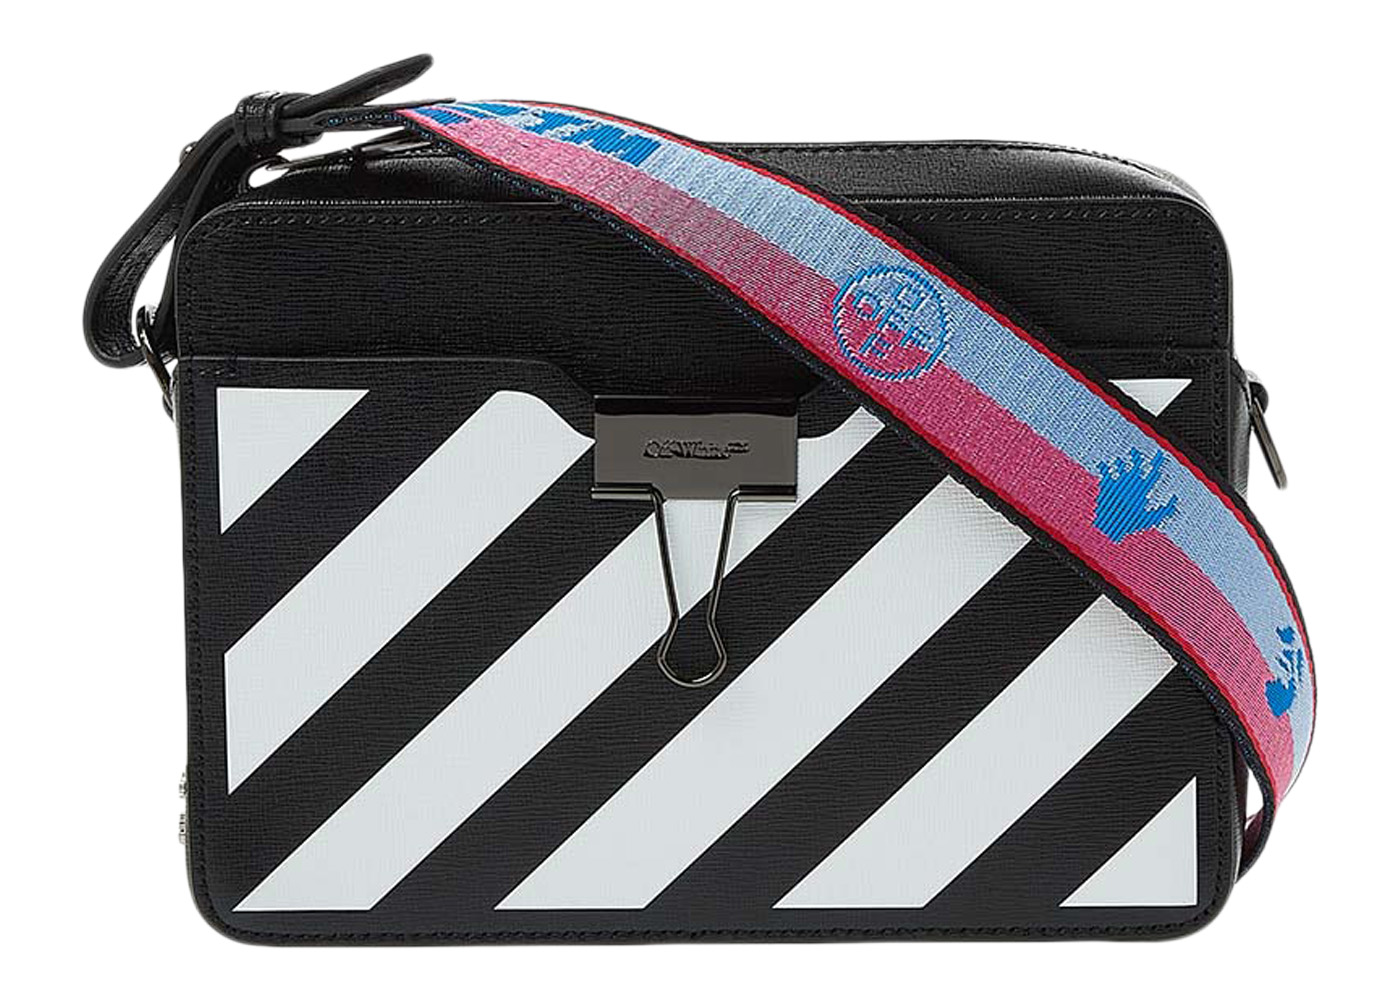 OFF-WHITE Diag Camera Bag Black/White with Red/Blue Strap in ...